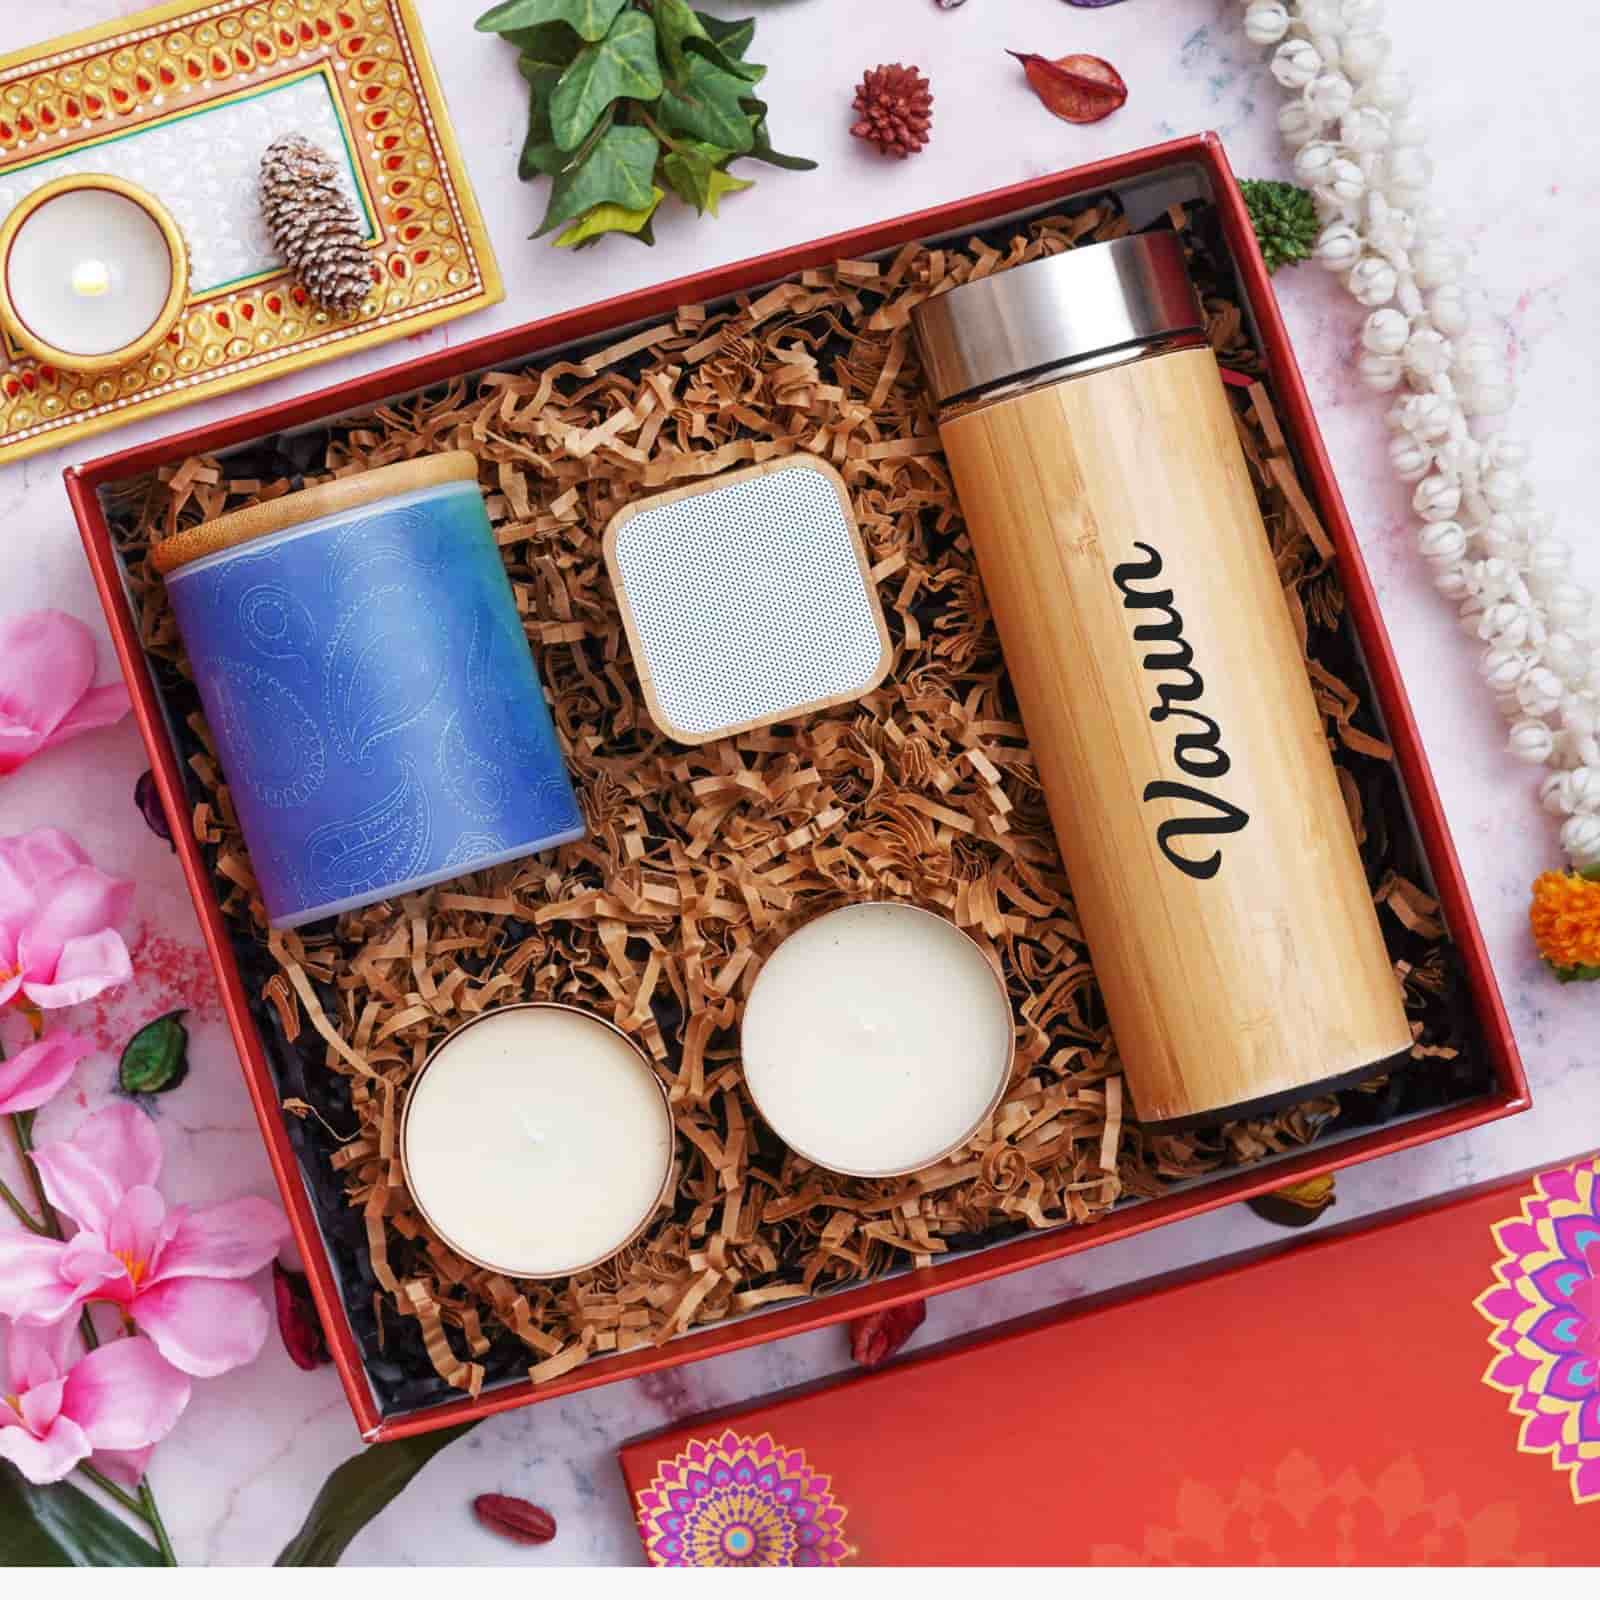 Best Diwali Return Gifts Ideas: Impress Your Loved Ones with These  Thoughtful Presents